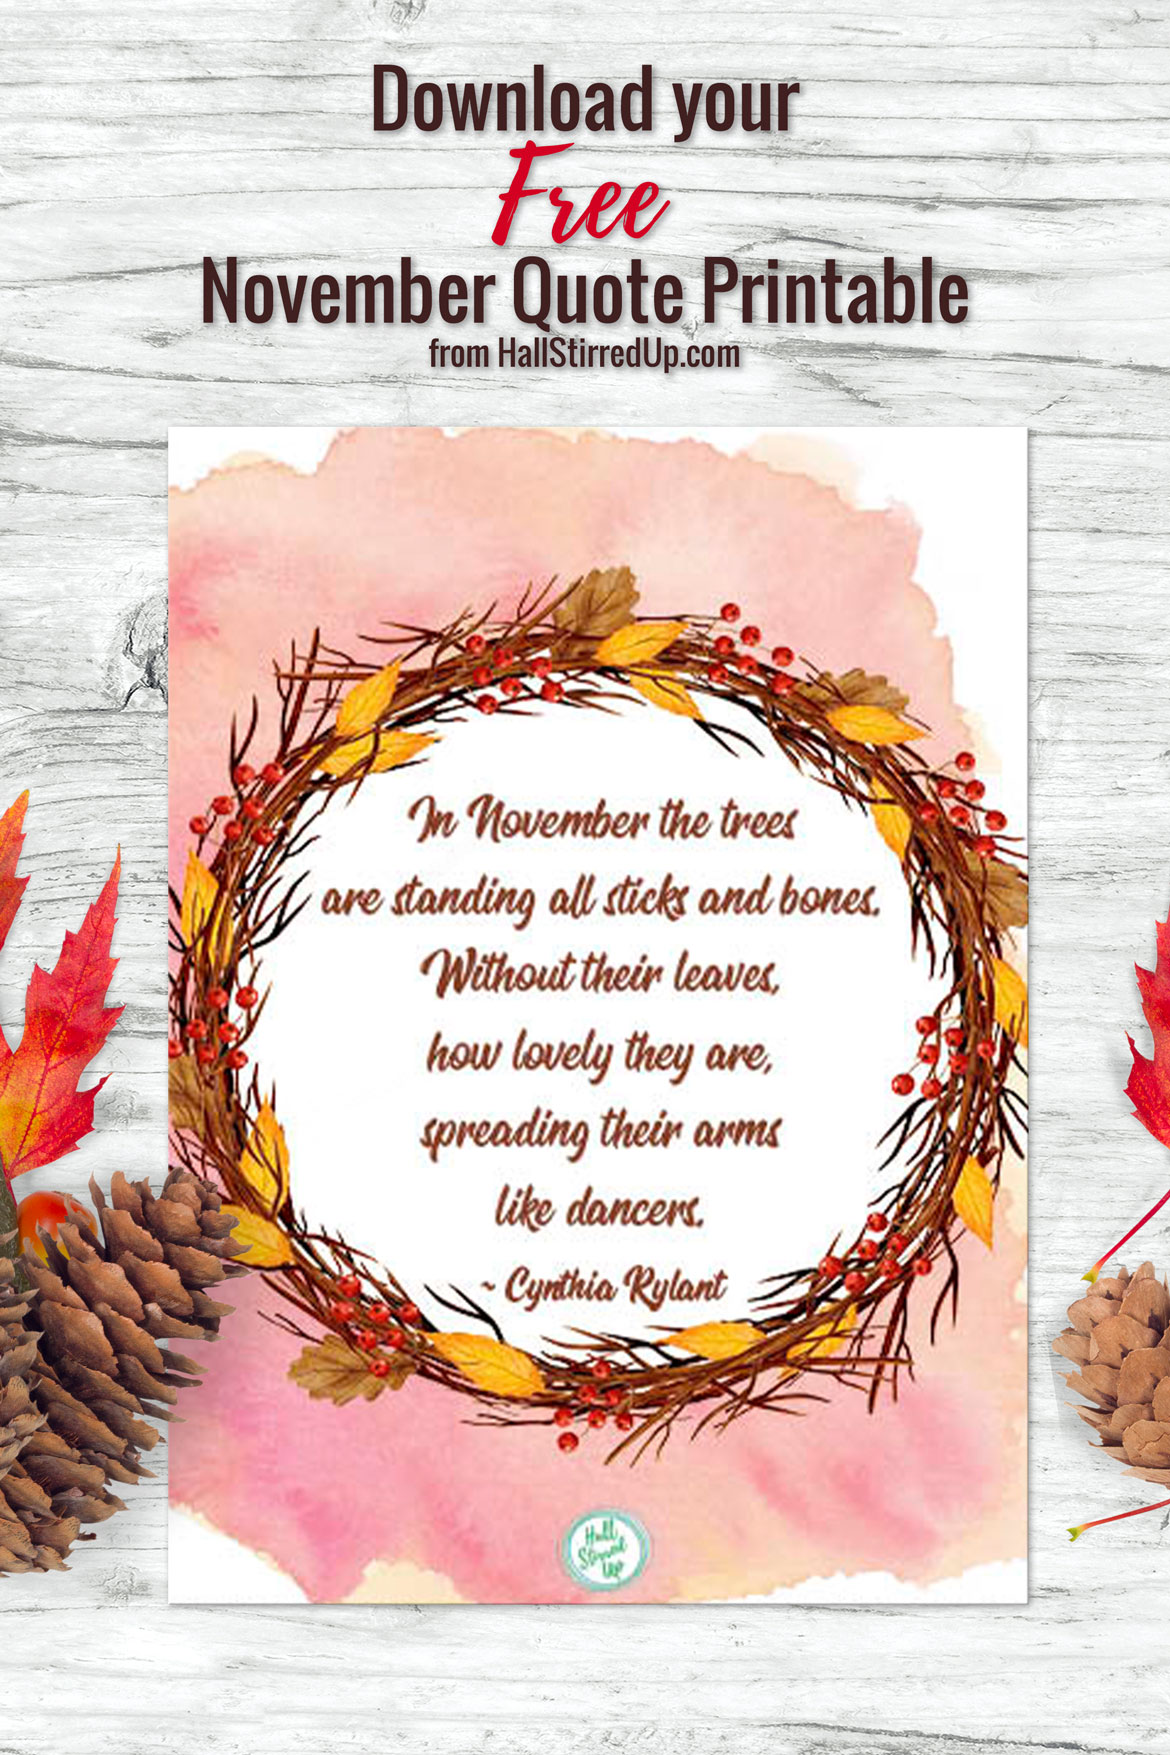 Novembers favorite quote and a new free printable